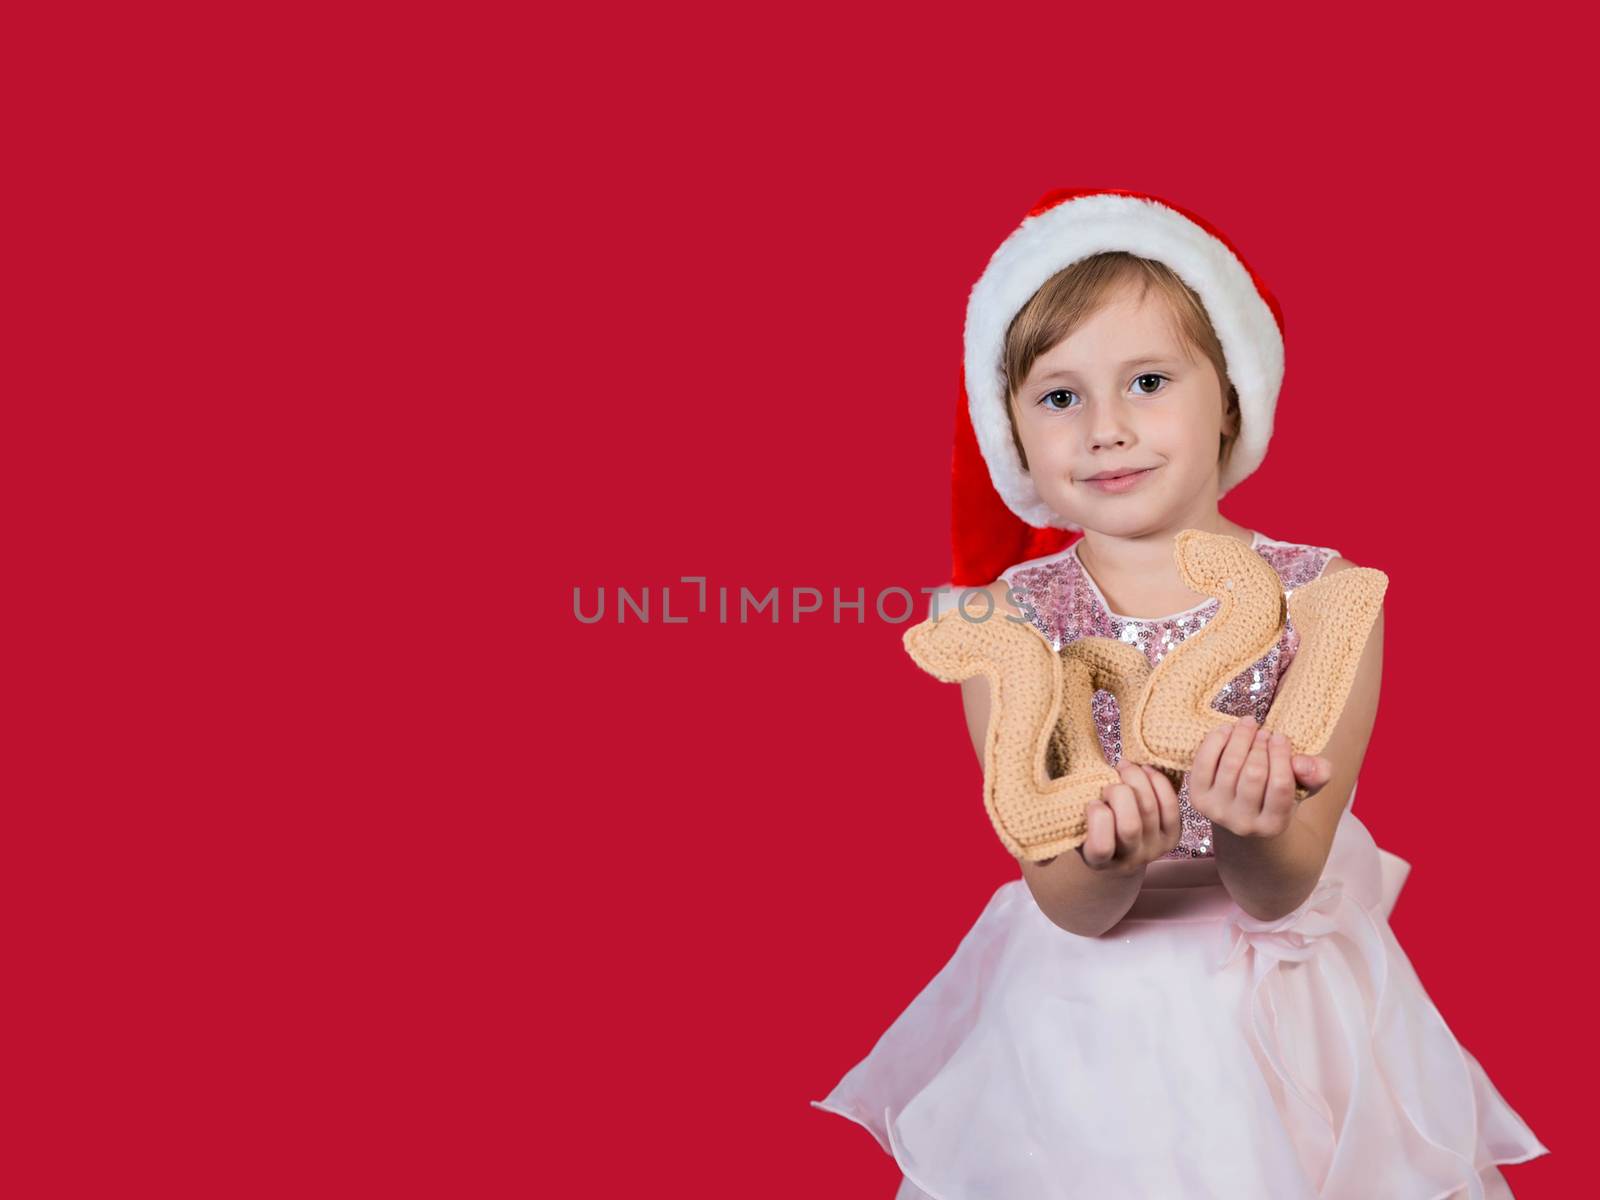 Adorable funny cacusian little girl in santa hat looking at the camera with croched numbers 2021 celebrating happy New Year isolated on red background. Merry Christmas presents shopping sale.